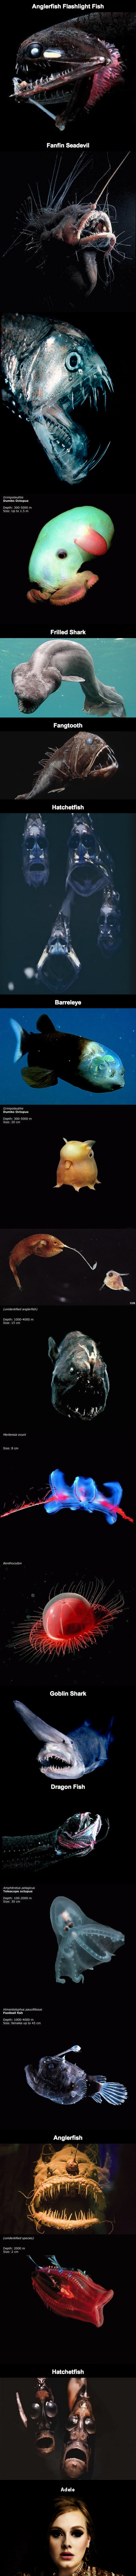 Creatures living in the abyss of the Mariana trench